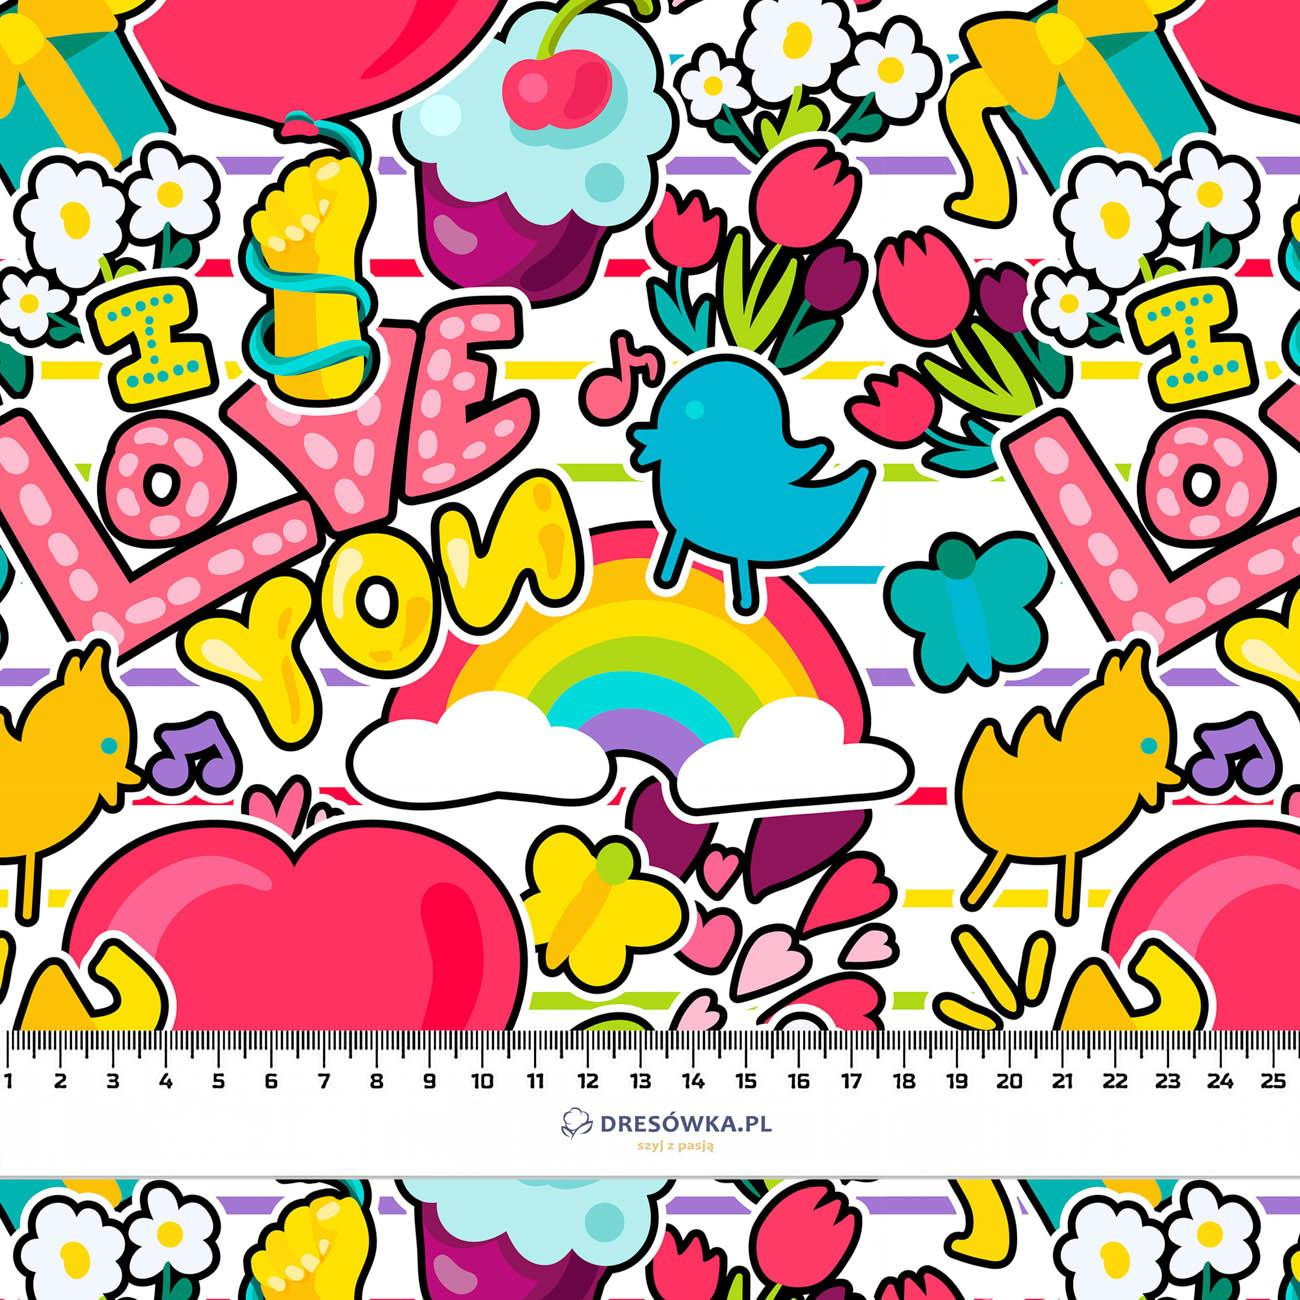 COLORFUL STICKERS PAT. 2 - quick-drying woven fabric